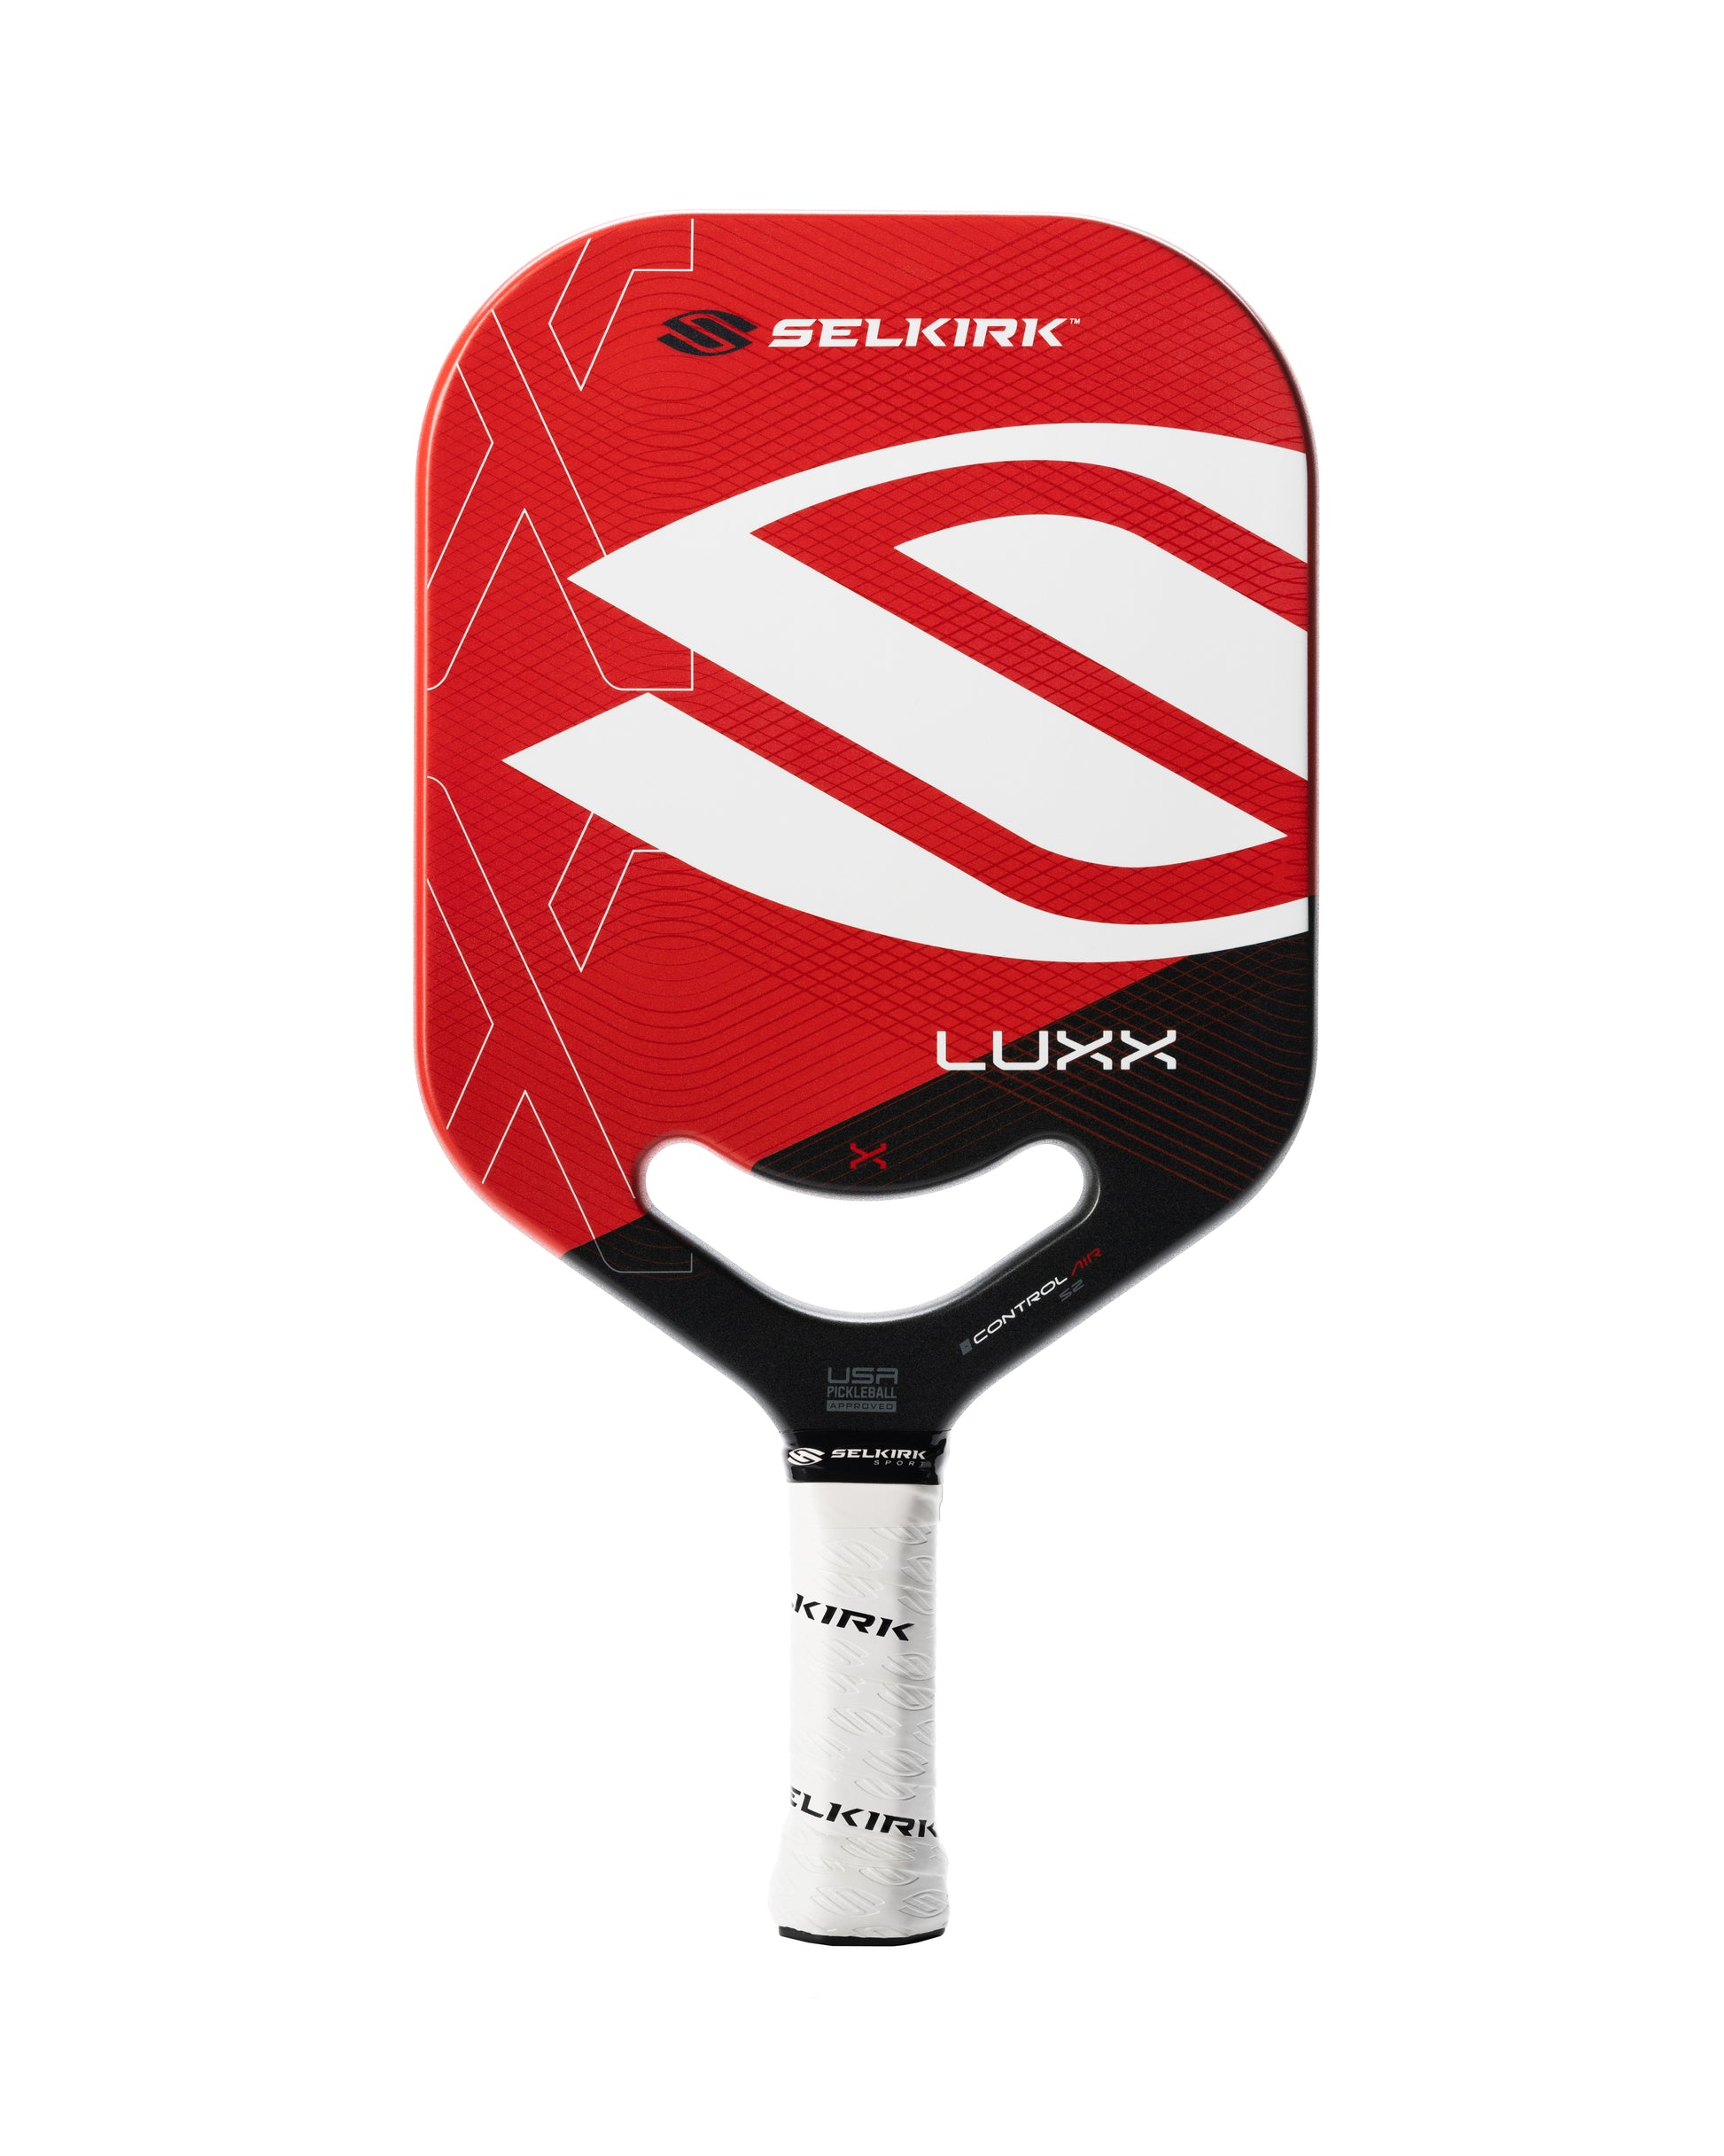 A Selkirk LUXX Control Air S2 Pickleball Paddle with a red handle.